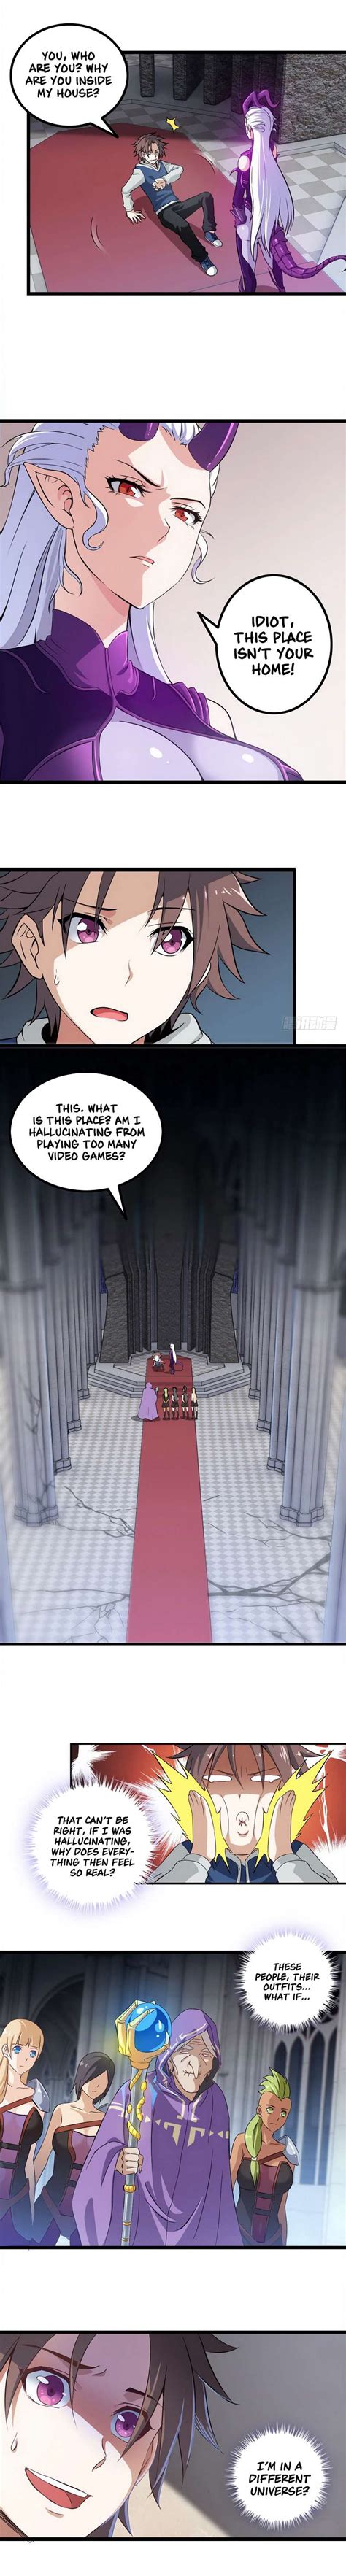 My Wife is a Demon Queen - Chapter 1 - Manga Online Team - Read Manga